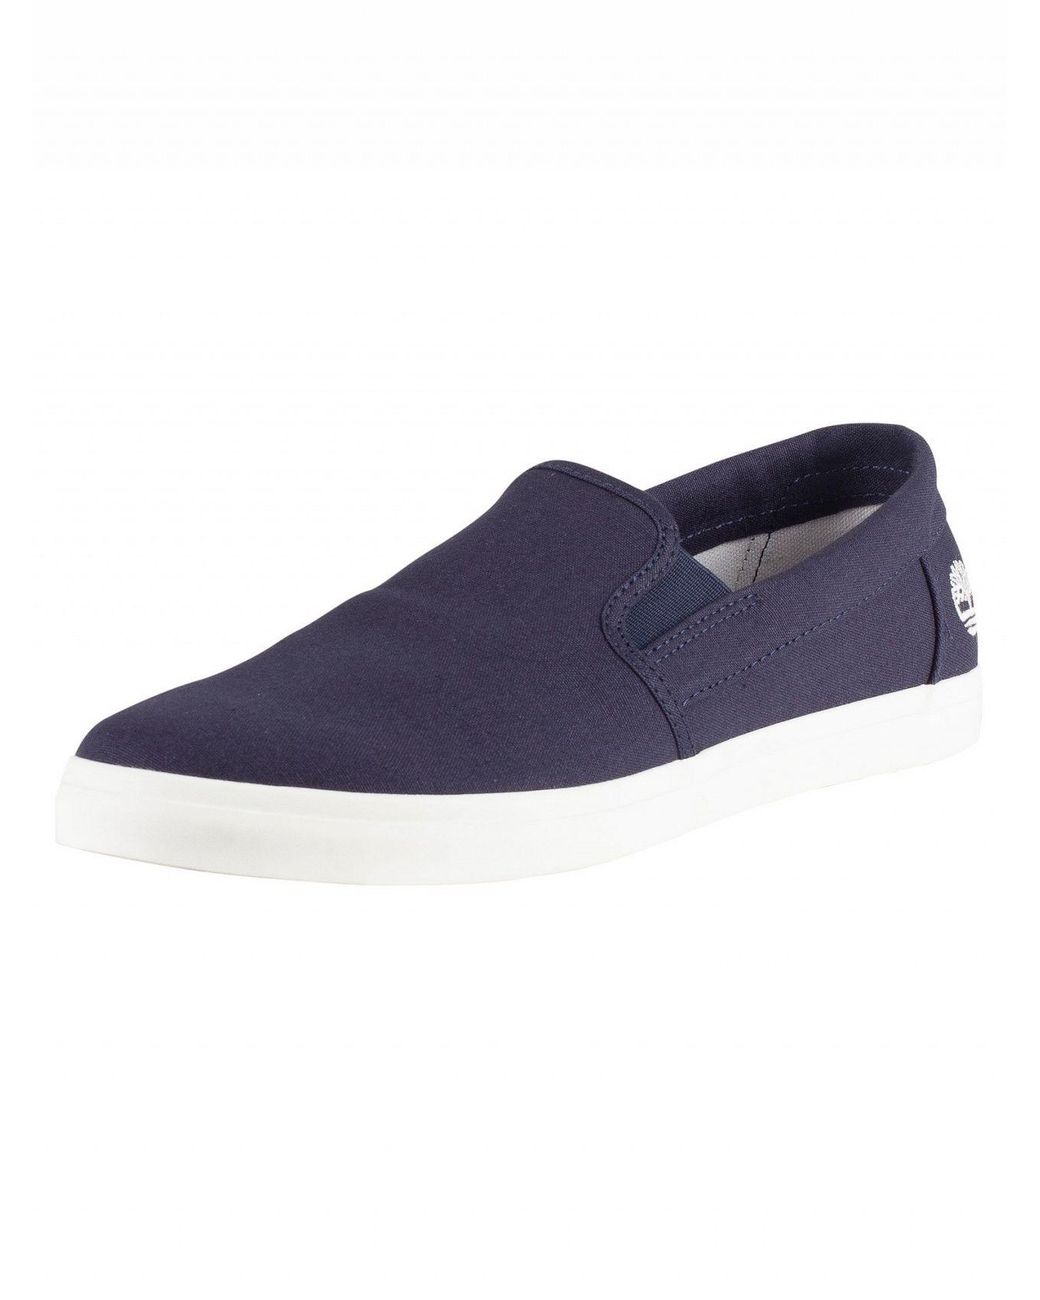 Timberland Navy Canvas Union Wharf Slip On Trainers in Blue for Men - Lyst